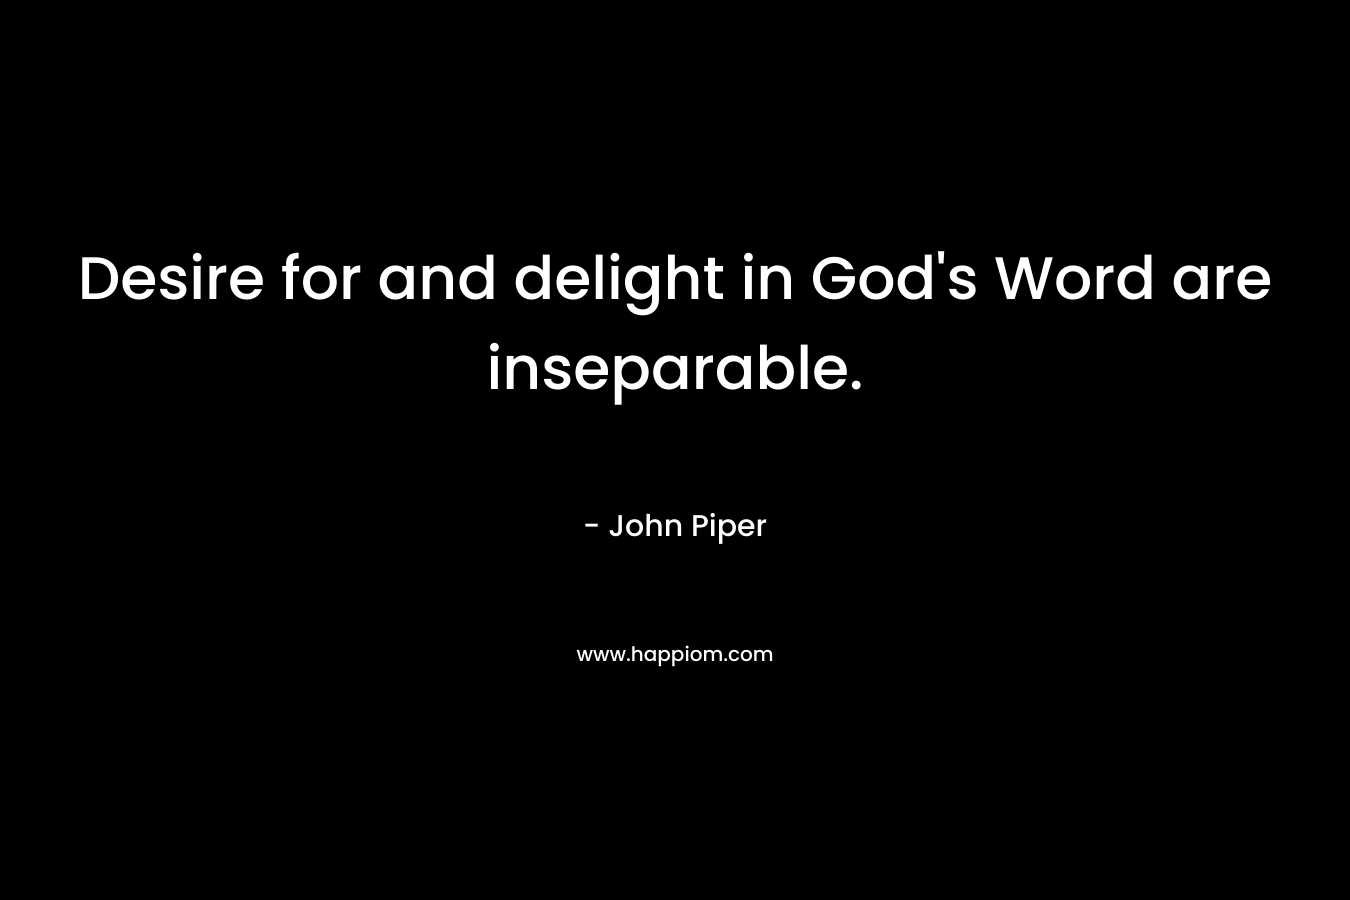 Desire for and delight in God’s Word are inseparable. – John Piper